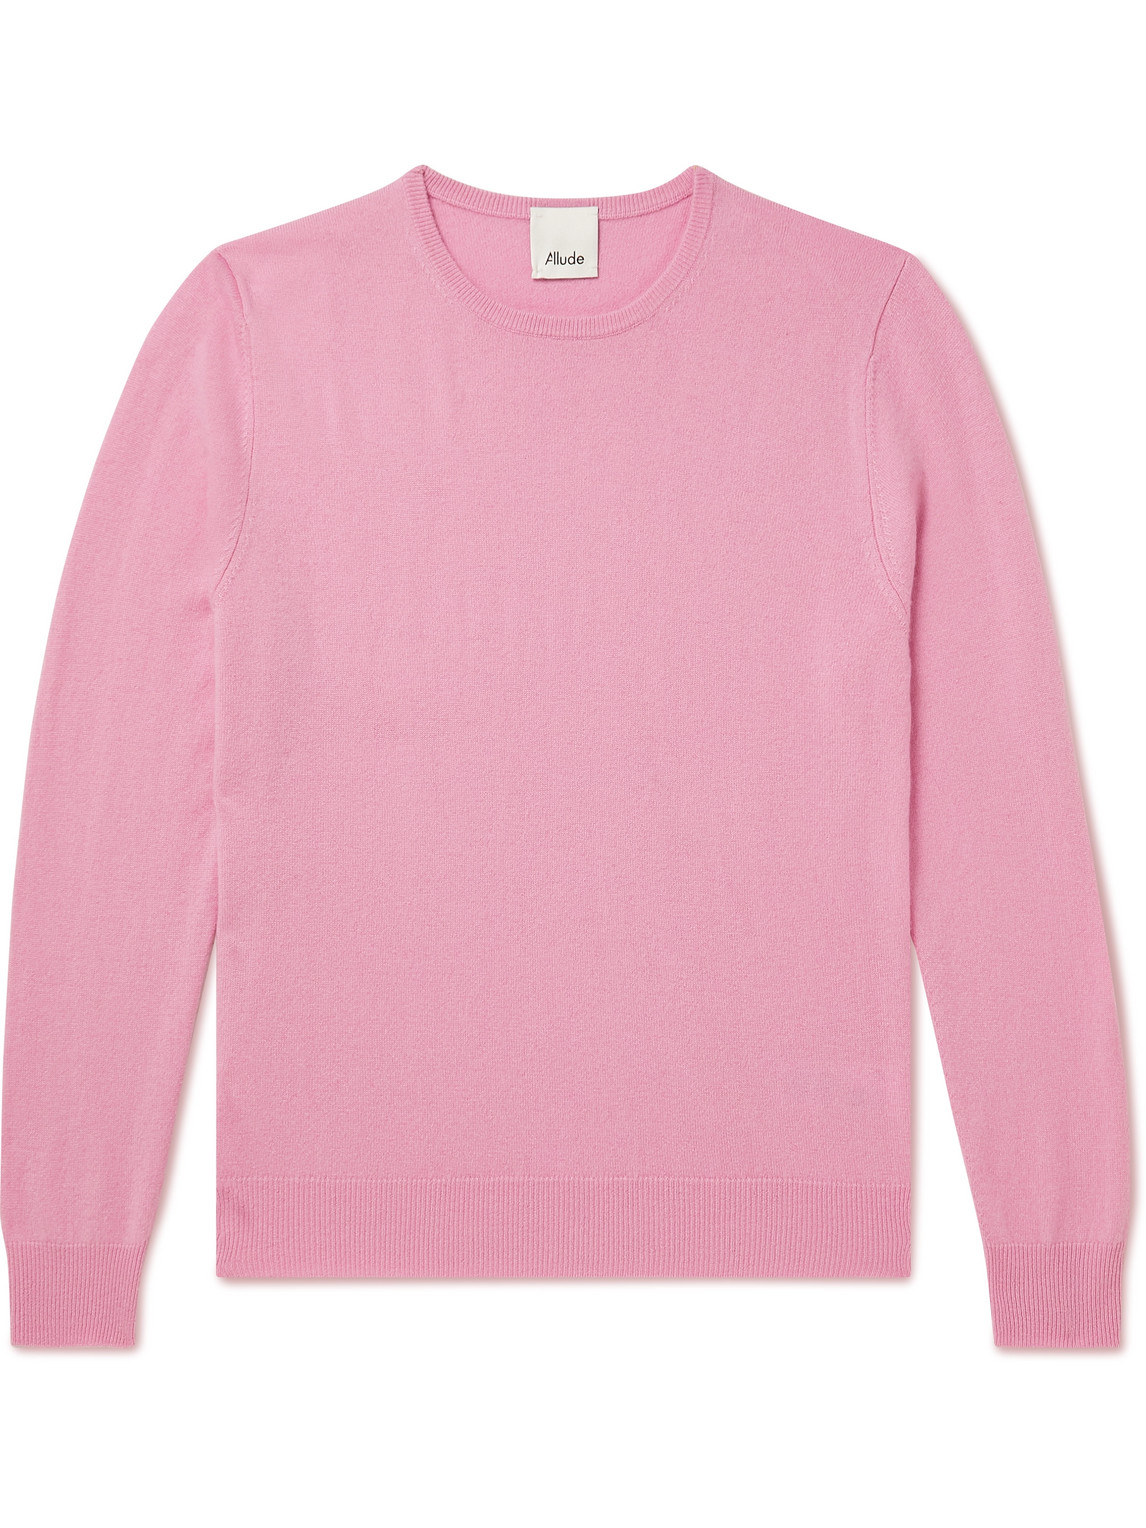 Allude Cashmere Sweater In Pink